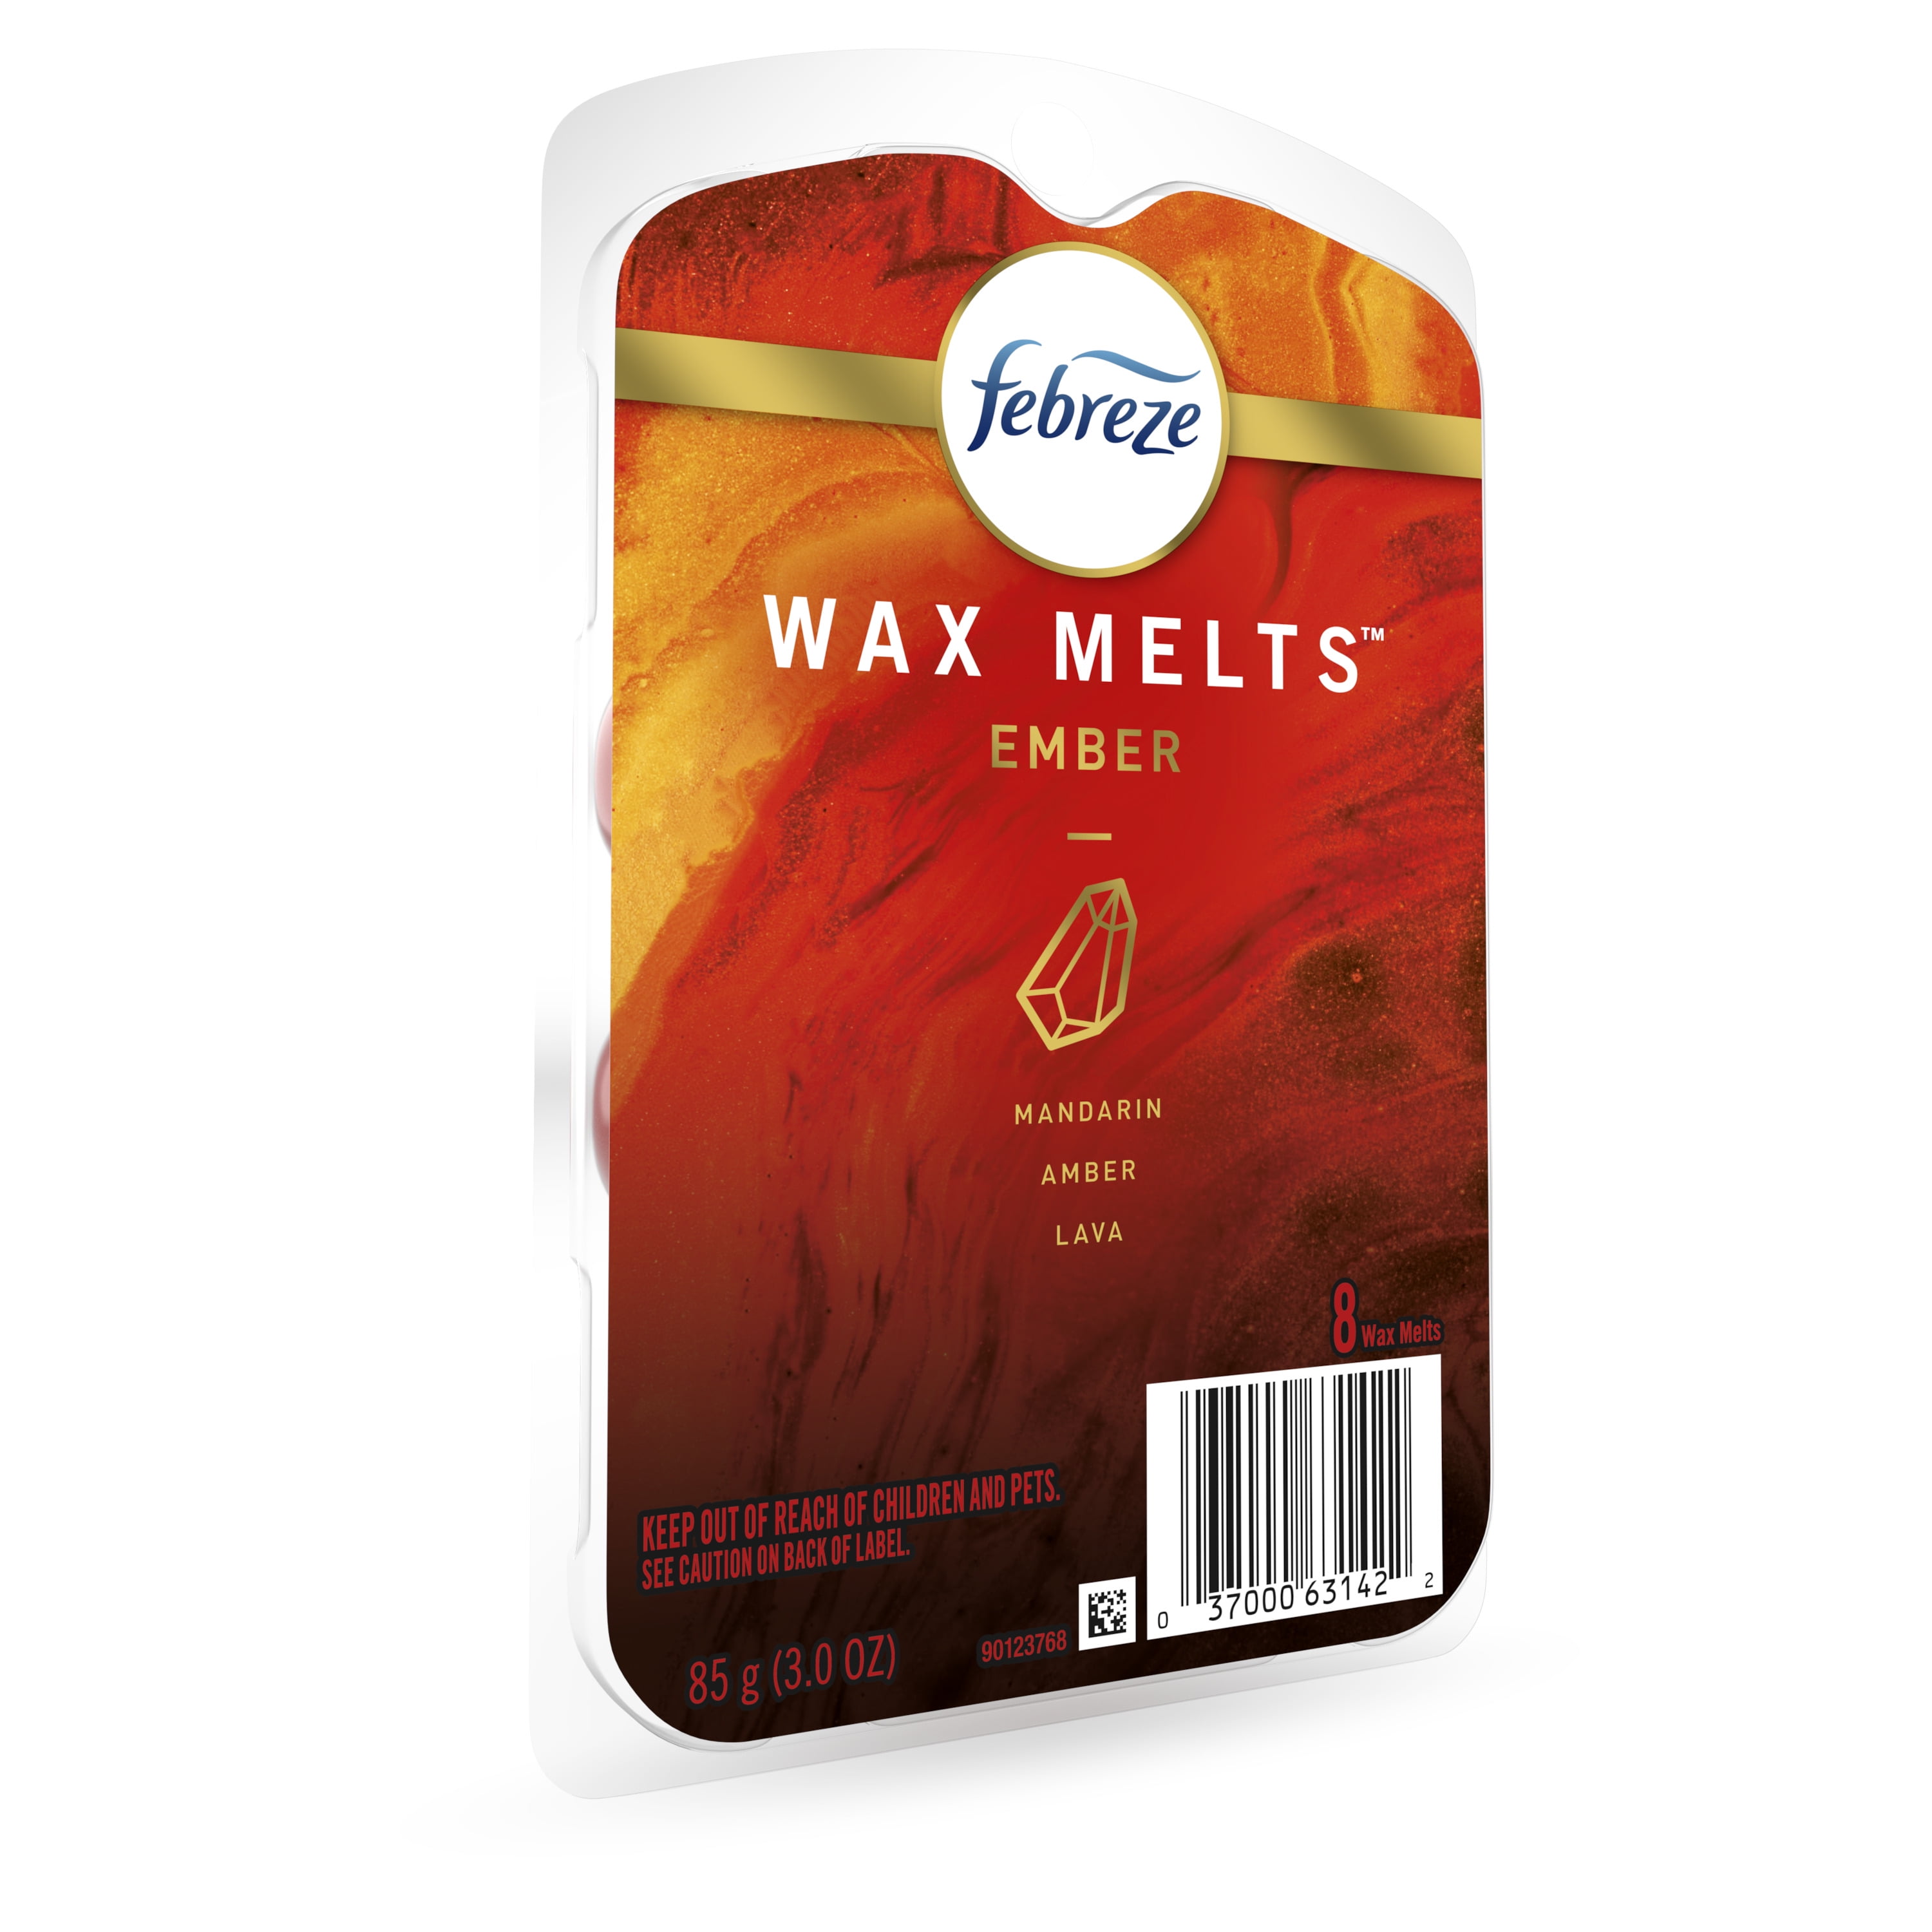 Febreze Limited Edition Cranberry Tart Wax Melts Net Wt. 2.75 oz (78 g) per Package - Pack of 3 Packages